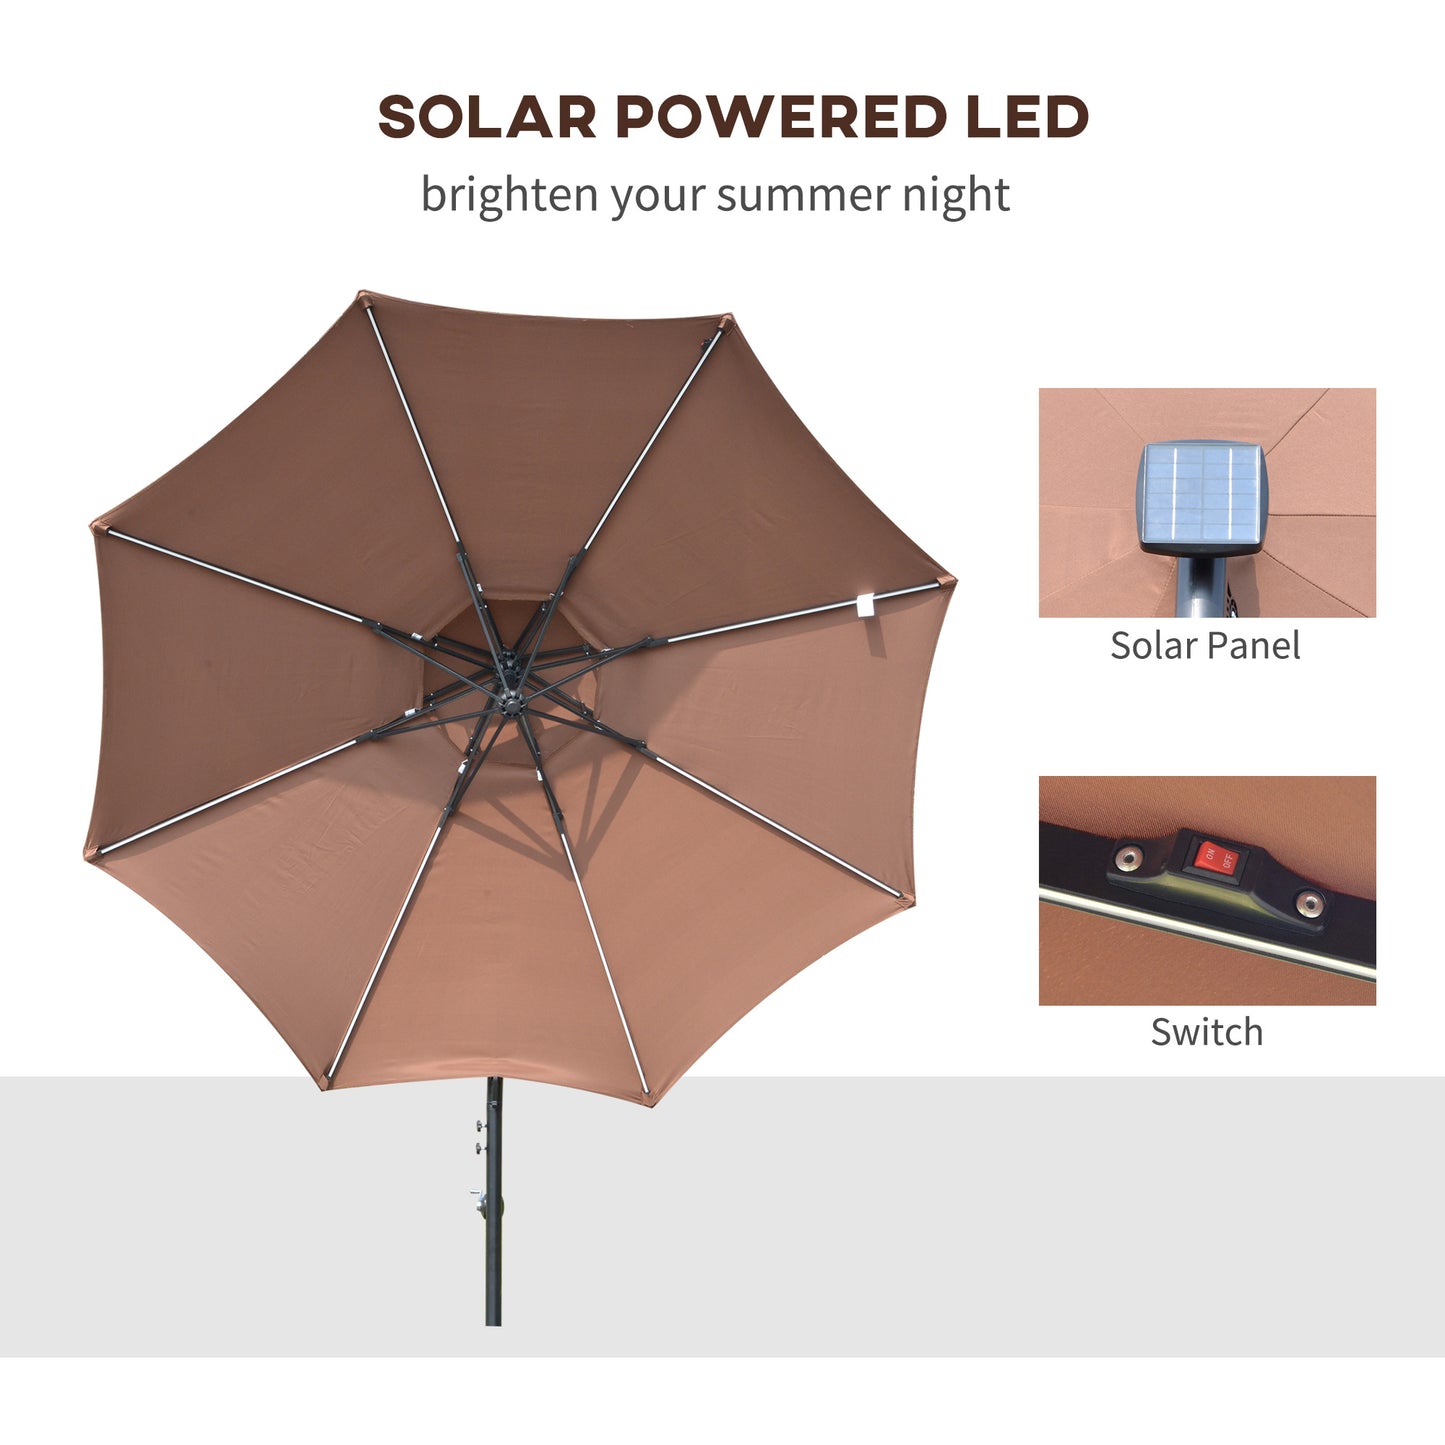 Outsunny 3(m) Cantilever Banana Parasol Hanging Umbrella with LED Solar lights, Crank, 8 Sturdy Ribs and Cross Base for Outdoor, Garden, Patio, Coffee